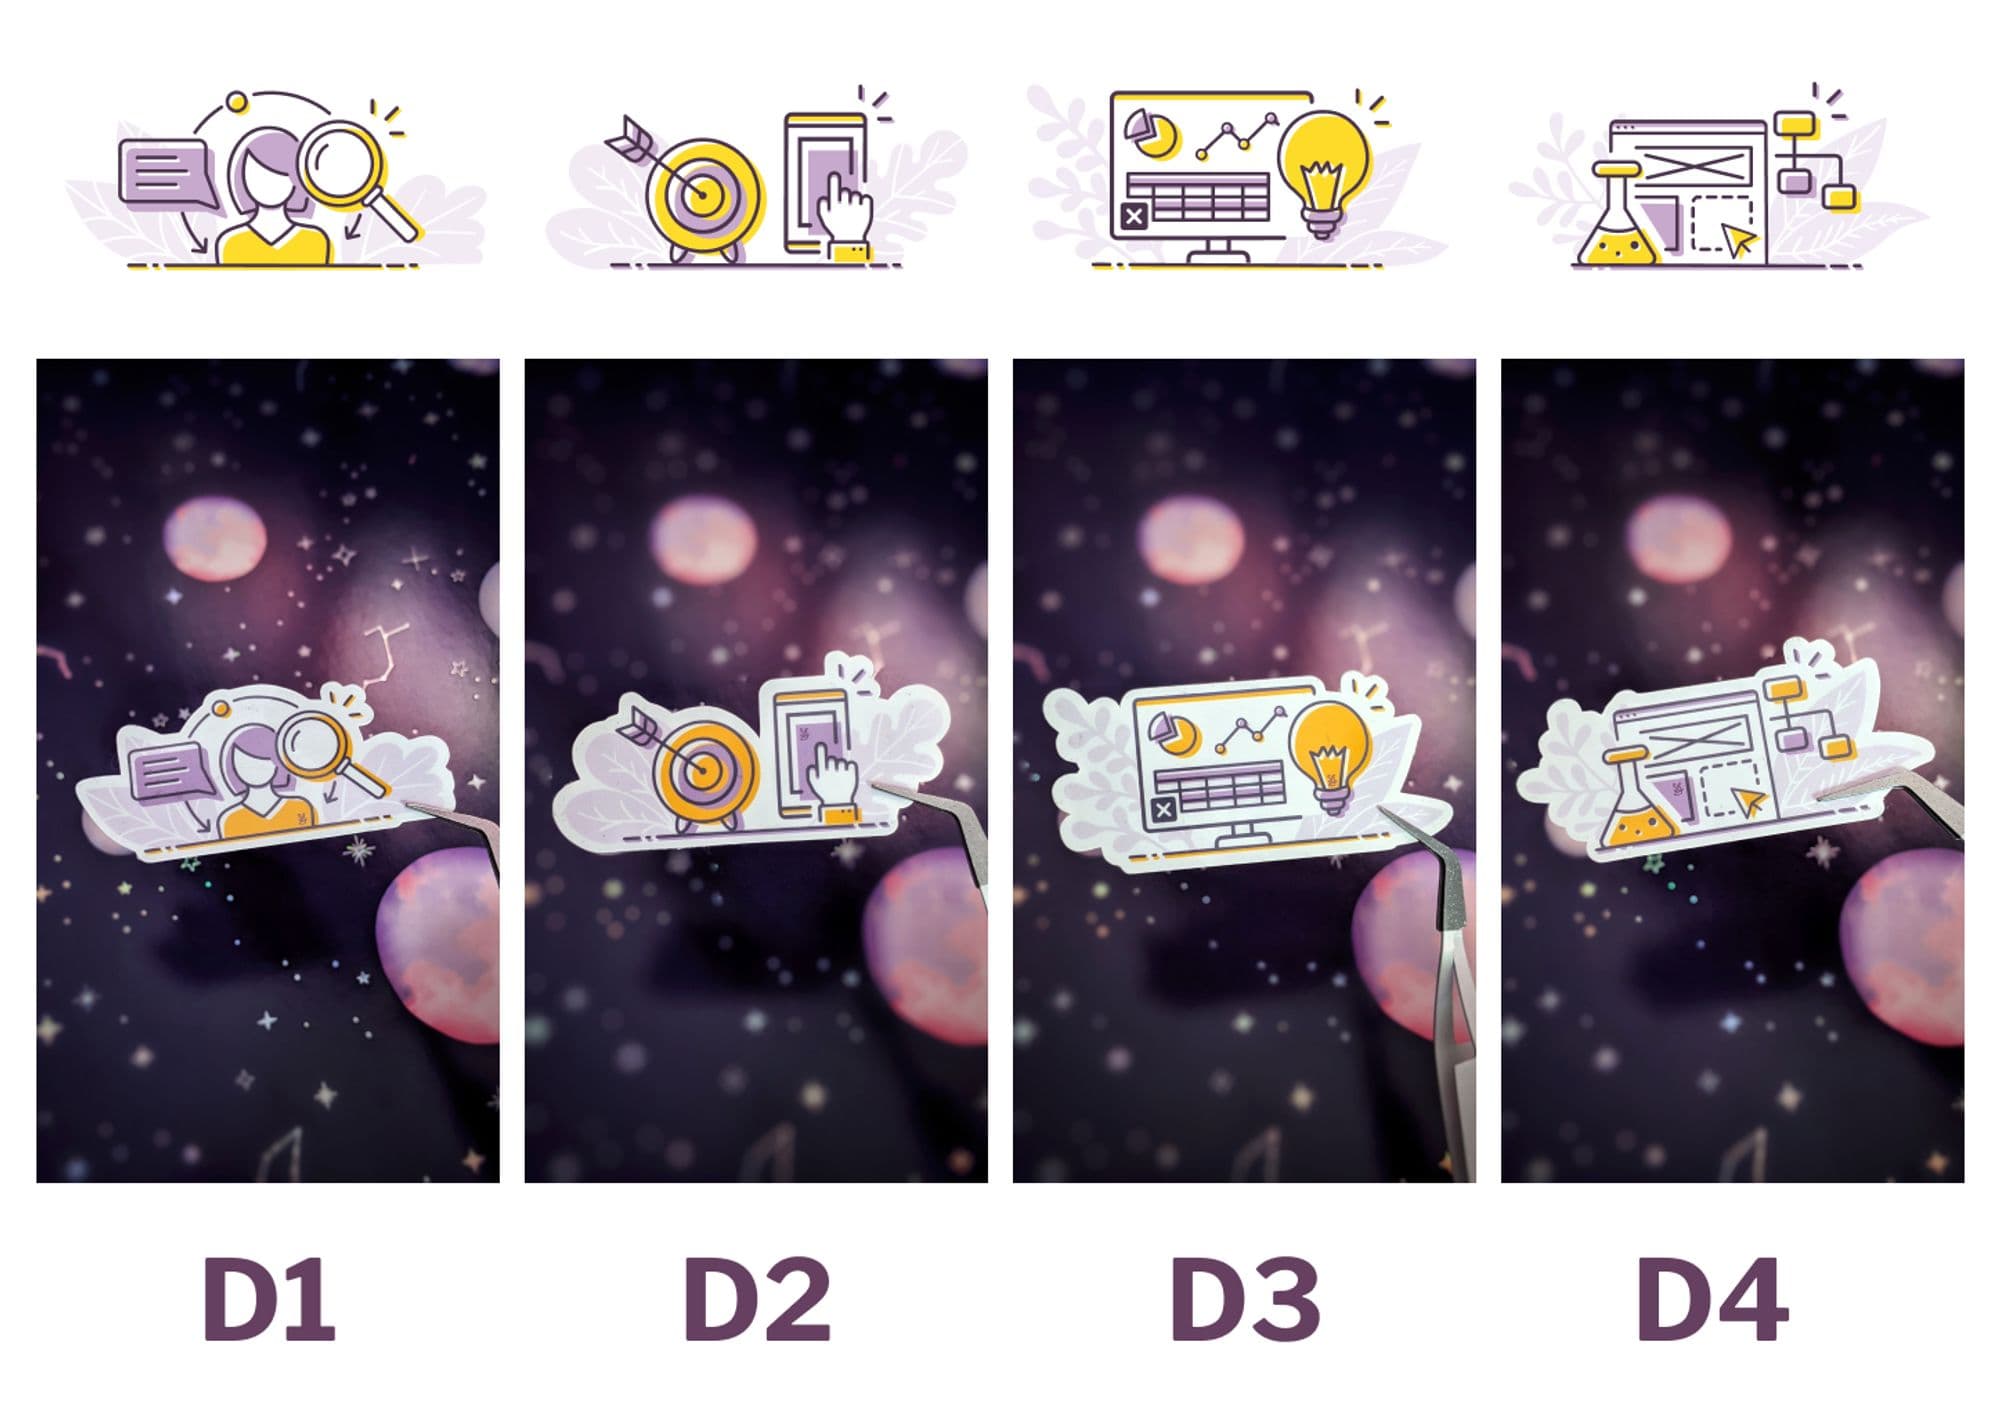 All stickers are yellow and purple illustrations. D1: a lady with a speech bubble and a magnifiying gass D2: a target with an arrow in it, a phone with a finger D3: a dashboard with graphs and a bubble in front of it D4: a flask, a wireframe of a website and a tree view 